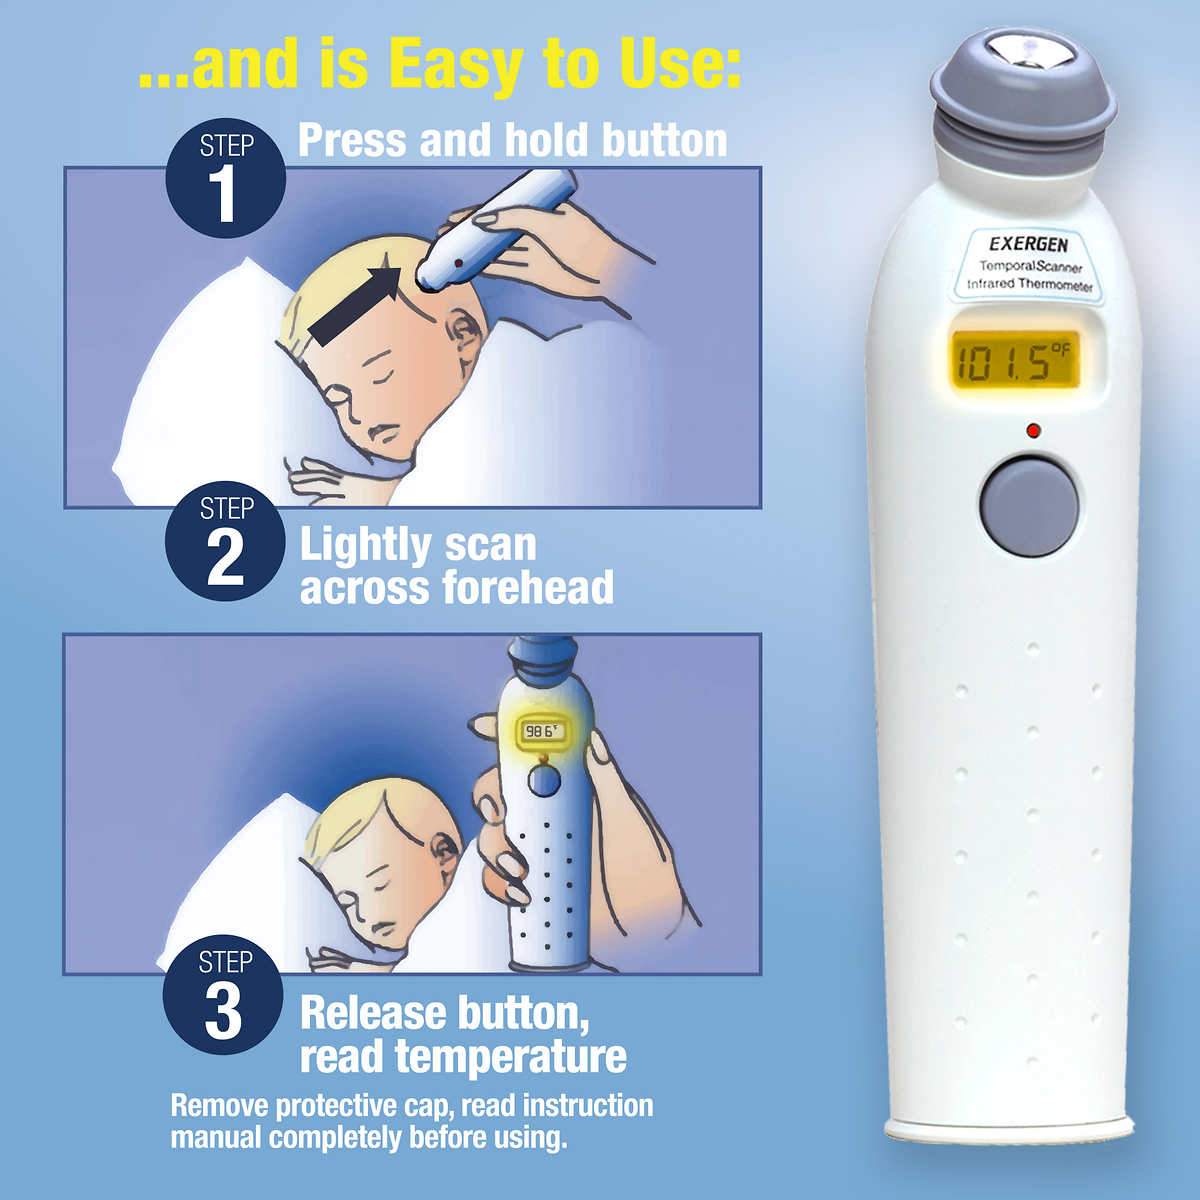 Exergen Smart Glow Temporal Artery Thermometer - image 1 of 5